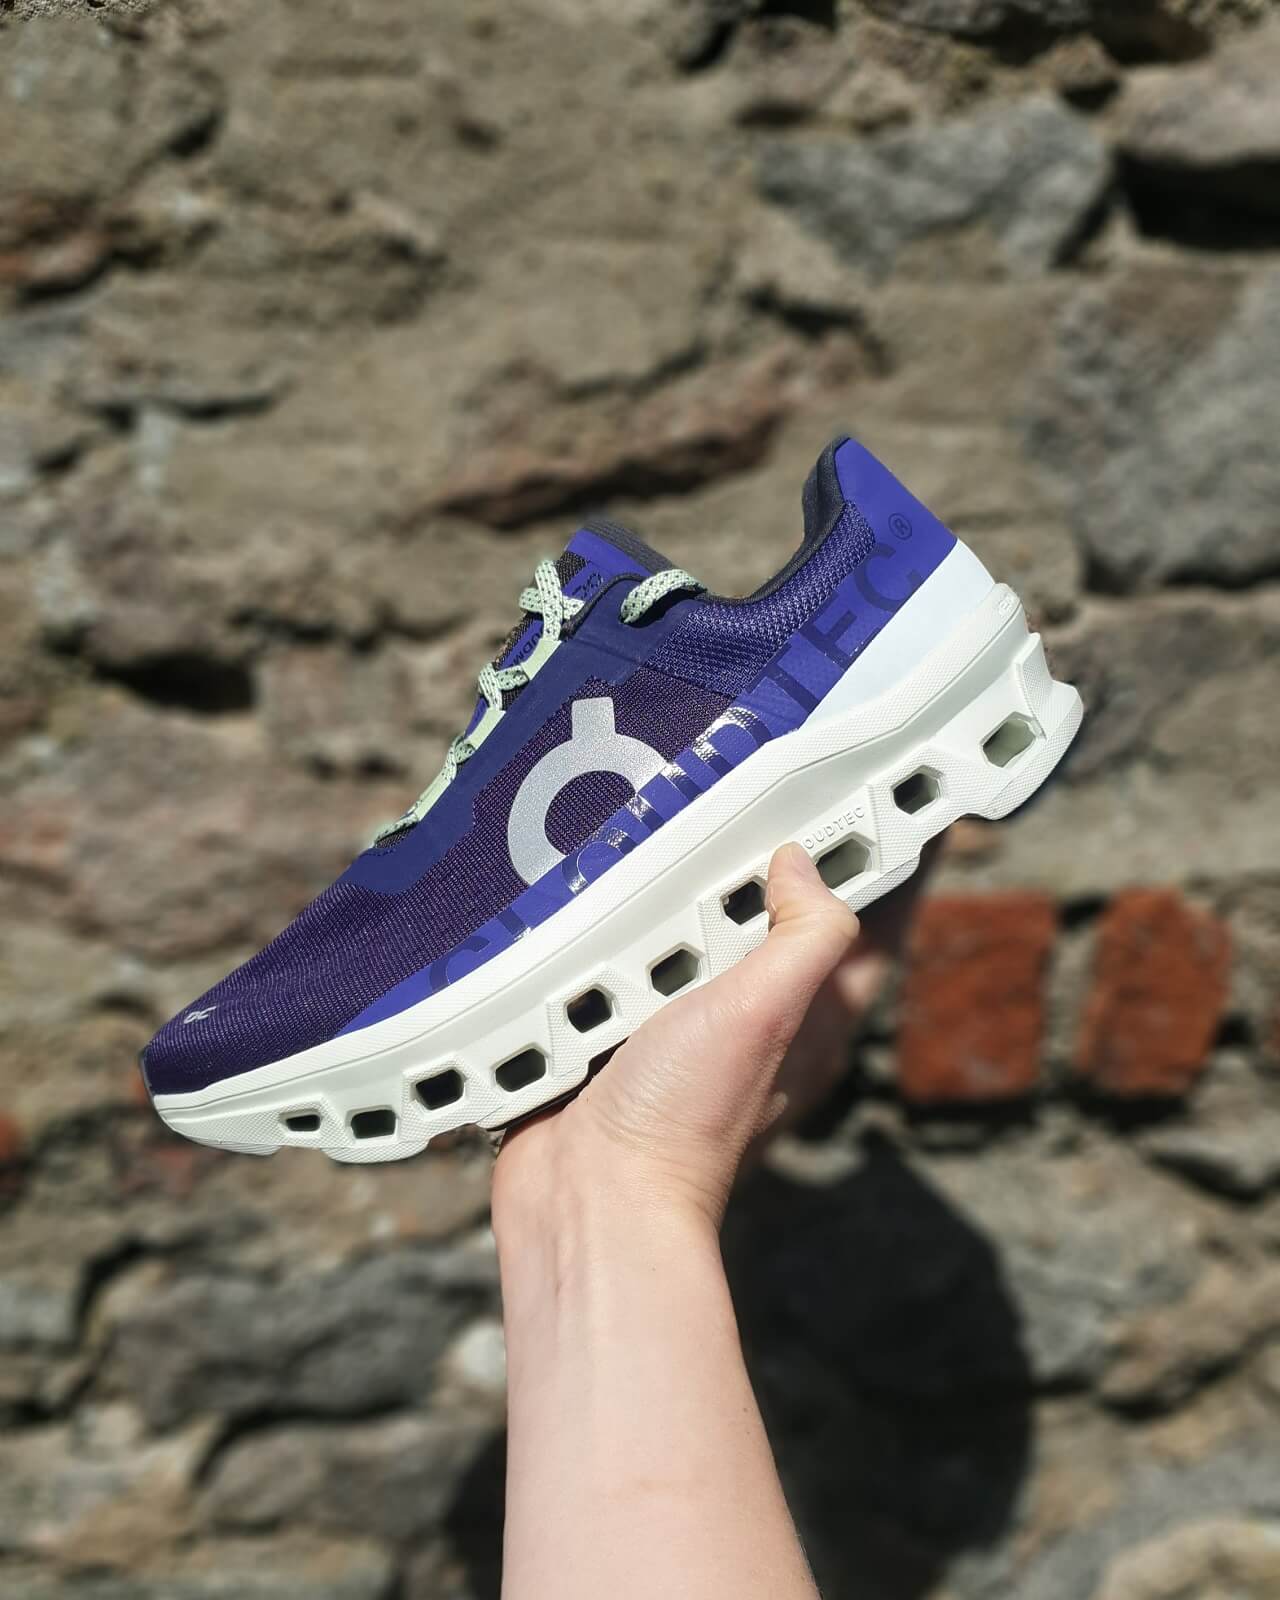 Hand holding an On Cloudmonster running shoe in purple against a stone wall